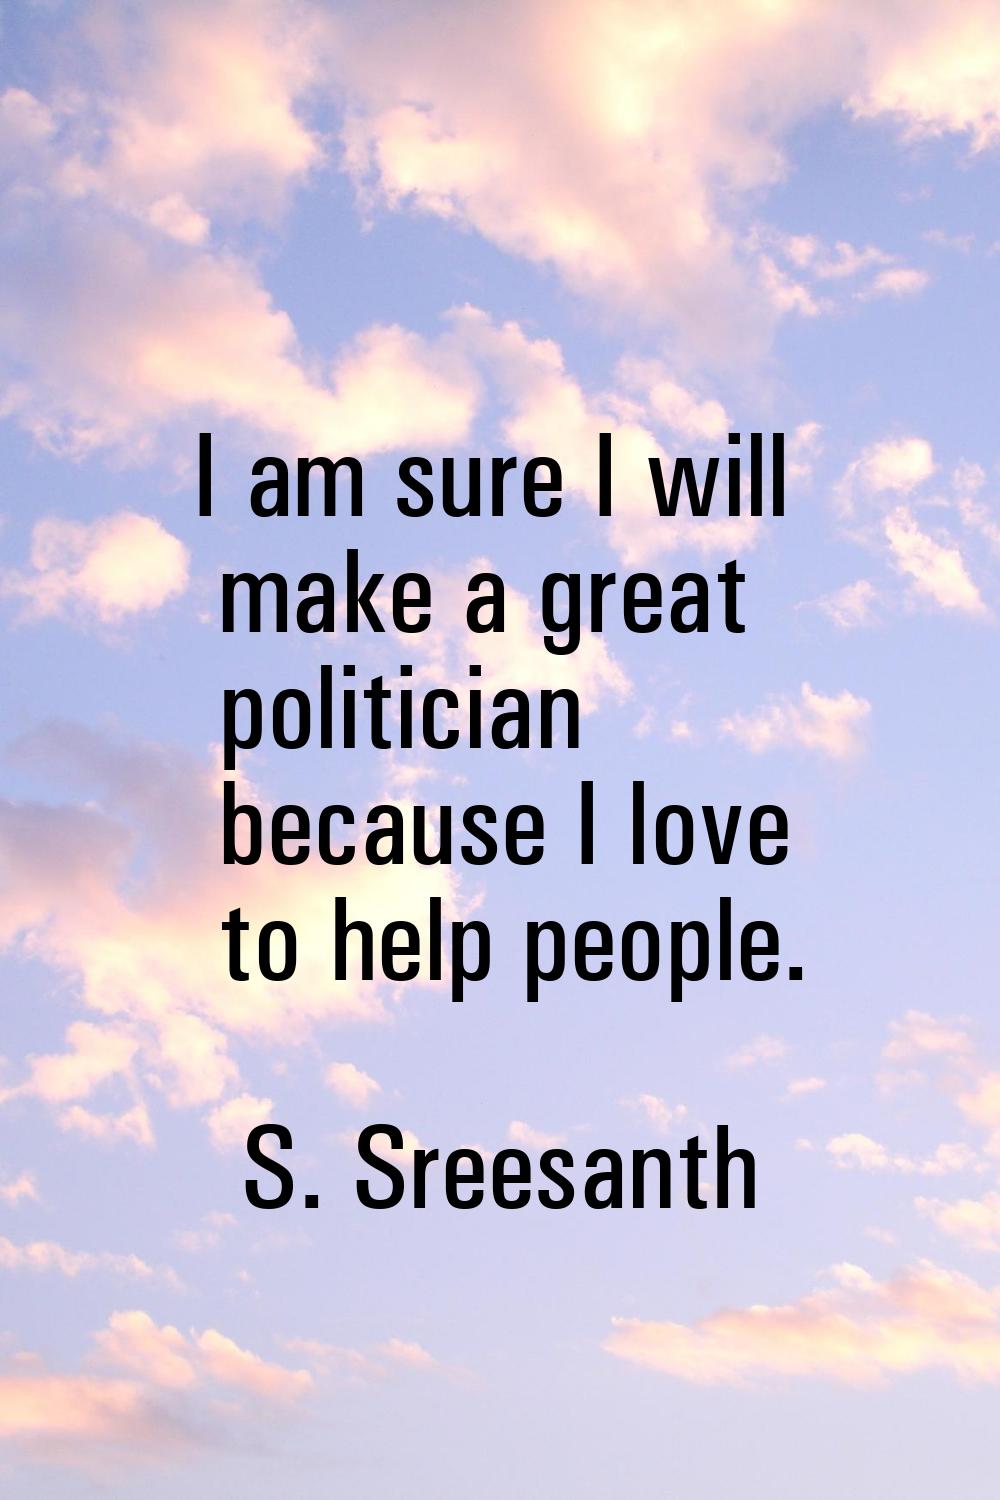 I am sure I will make a great politician because I love to help people.